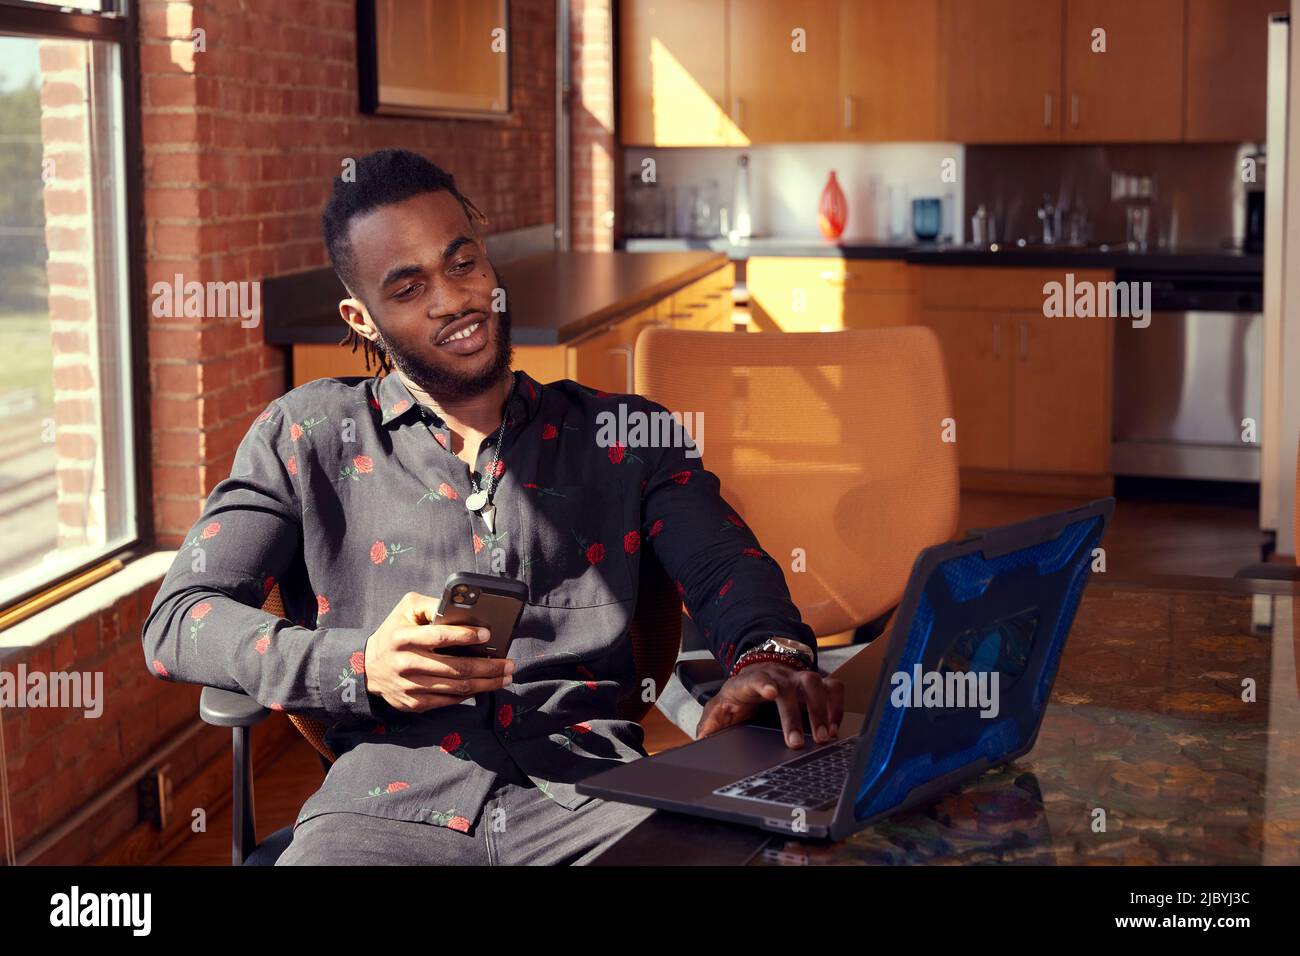 portrait of young ethnic man sitting at conference table using smartphone and laptop computer. Stock Photo